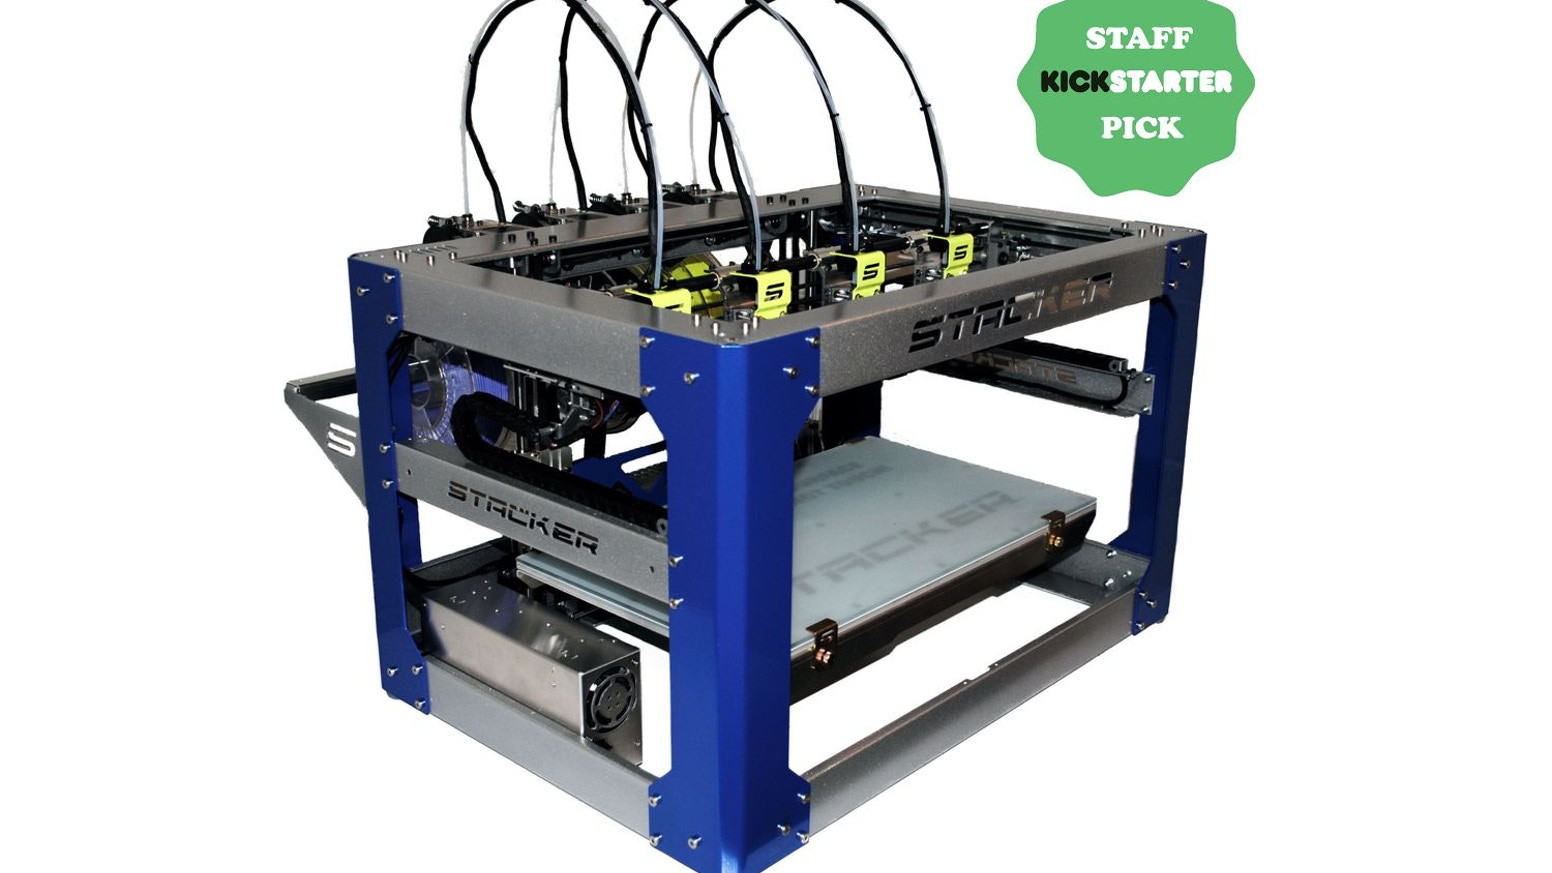 21 Recommended Large Mexican Floor Vases 2024 free download large mexican floor vases of stacker a new kind of commercial 3d printer by stacker llc within an affordable commercial grade 3d printer offering high print speed large build volume